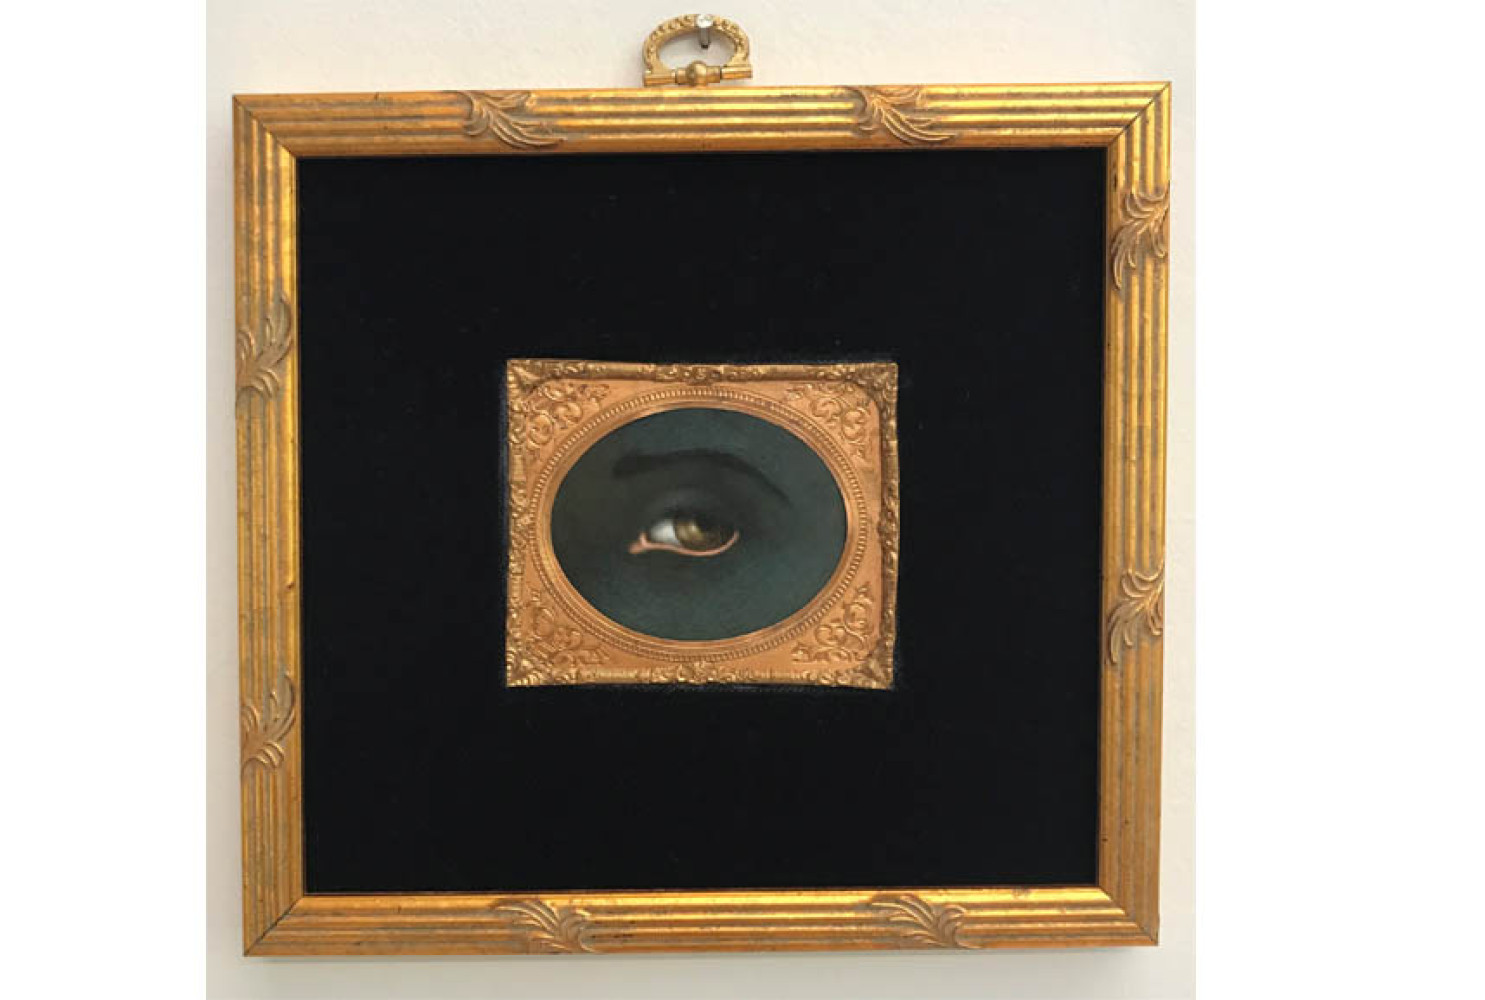 Untitled (after Kerry James Marshall) from Series I: Reversing the Gaze, 2018, By Tabitha Vevers (American, b.1957); Oil on Ivorine with tintype frame and fabric; 2 3/4 x 3 1/4 inches in 7 x 7 1/2 inch frame; Collection of the artist, Courtesy of Bookstein Projects
